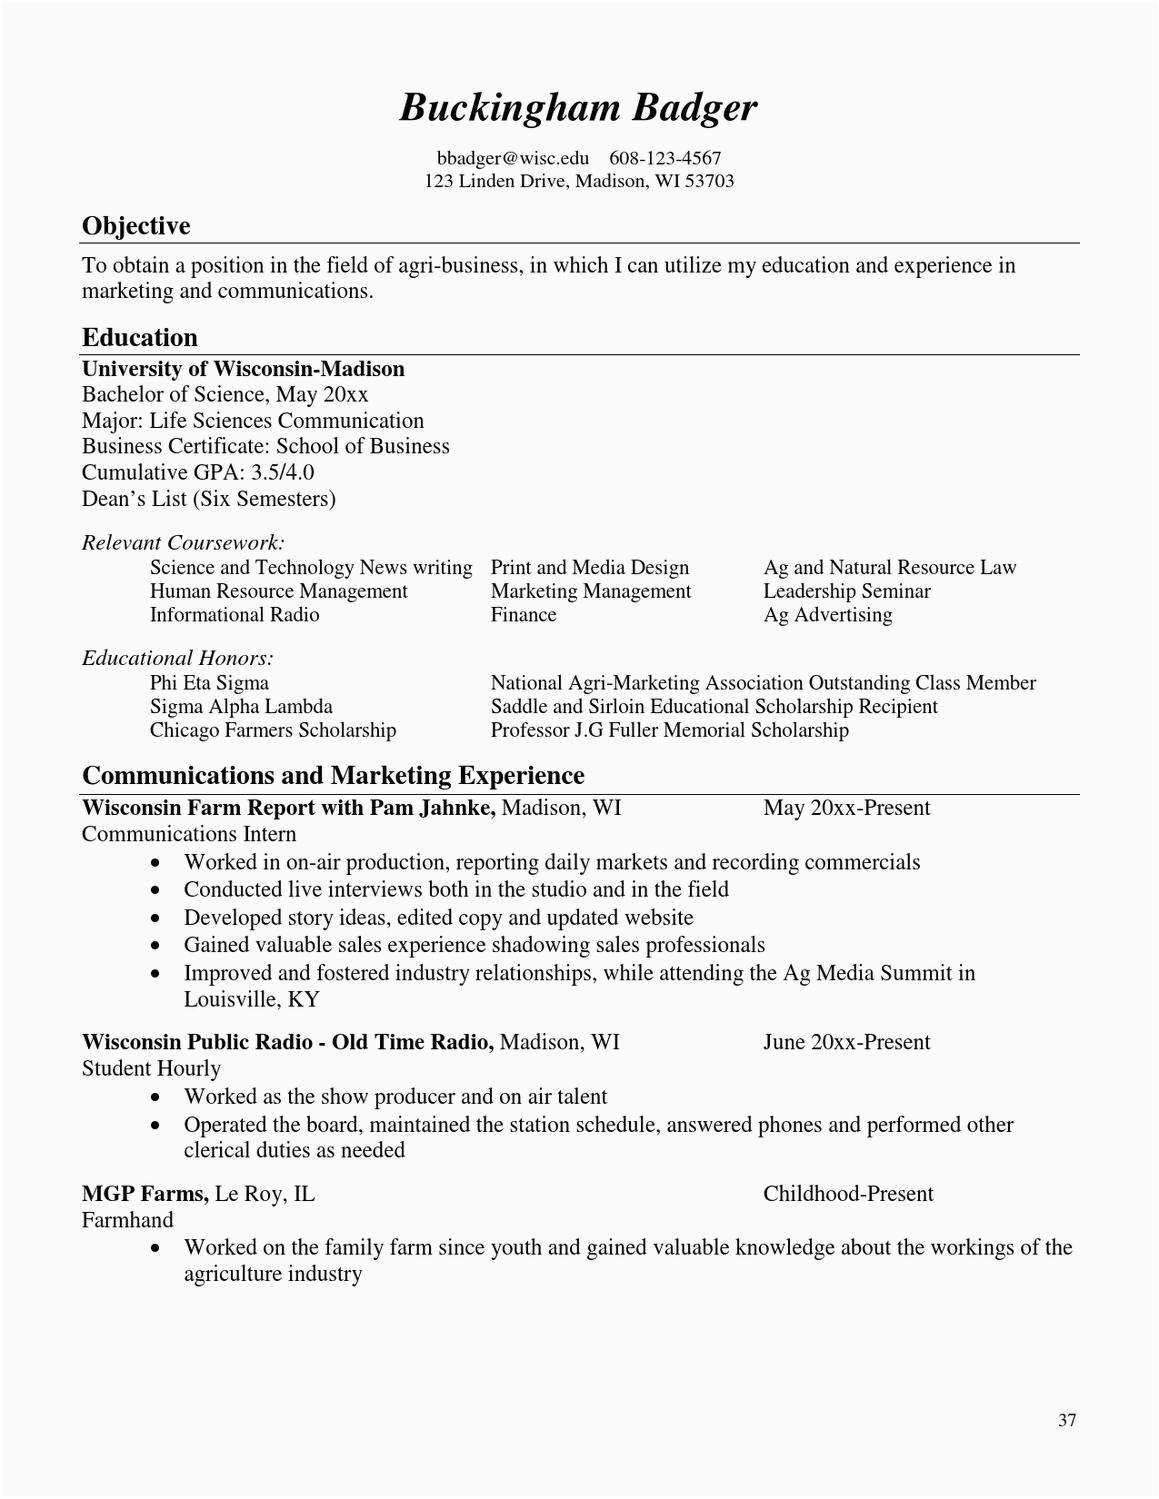 Uw Madison Business School Resume Template Resume Book by Career Services issuu